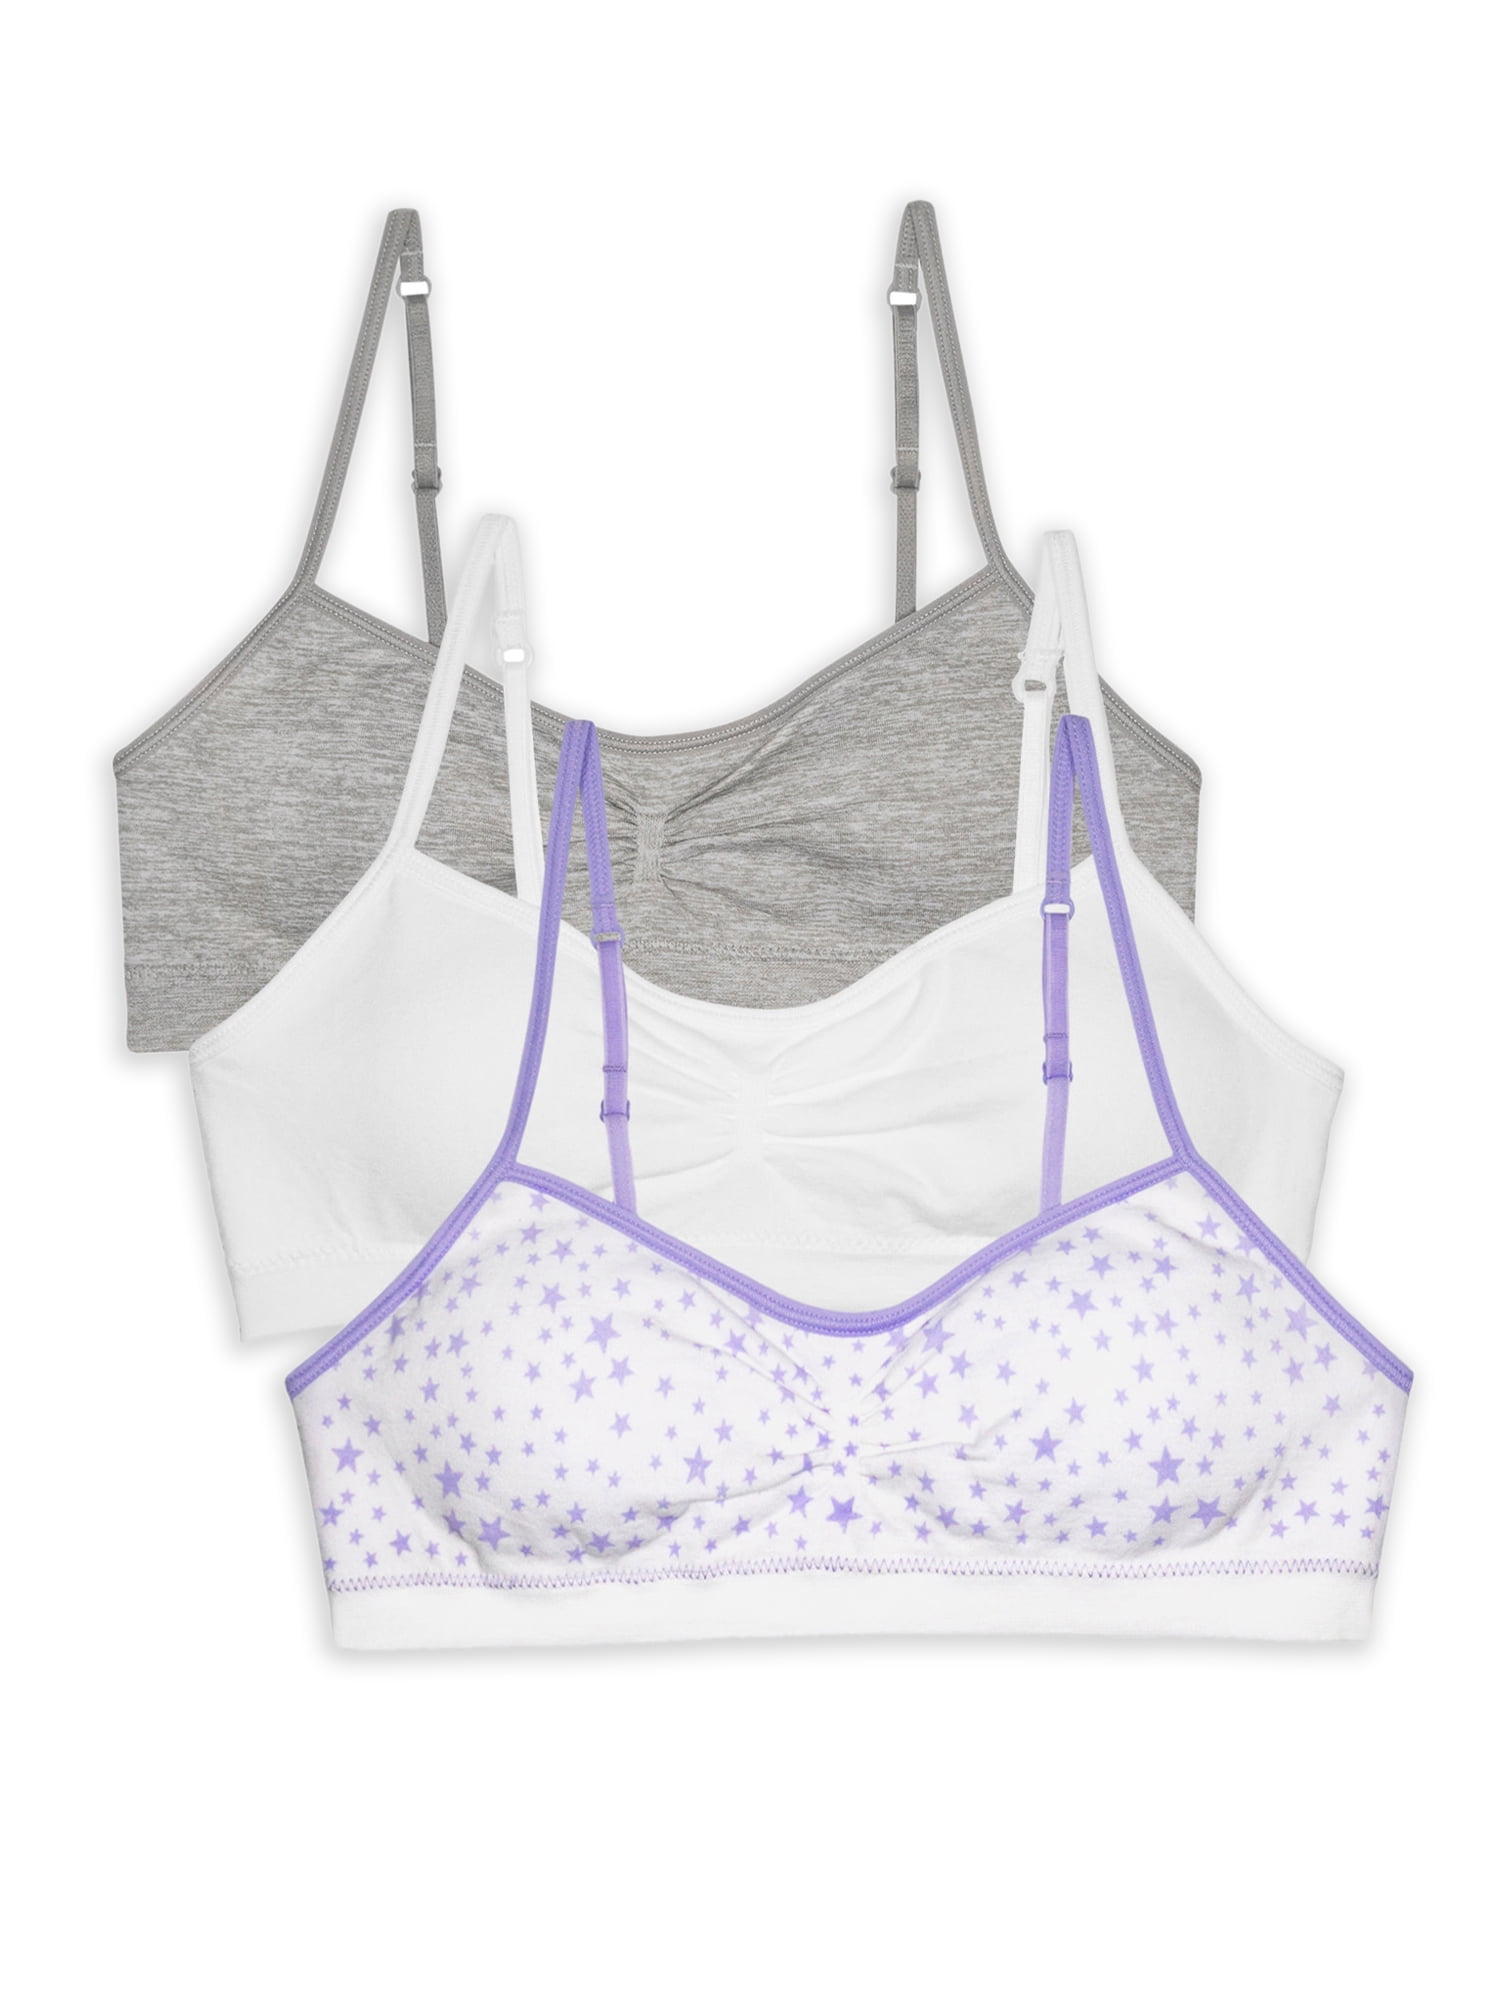 Fruit Of The Loom Girls Seamless Trainer Bra With Removable